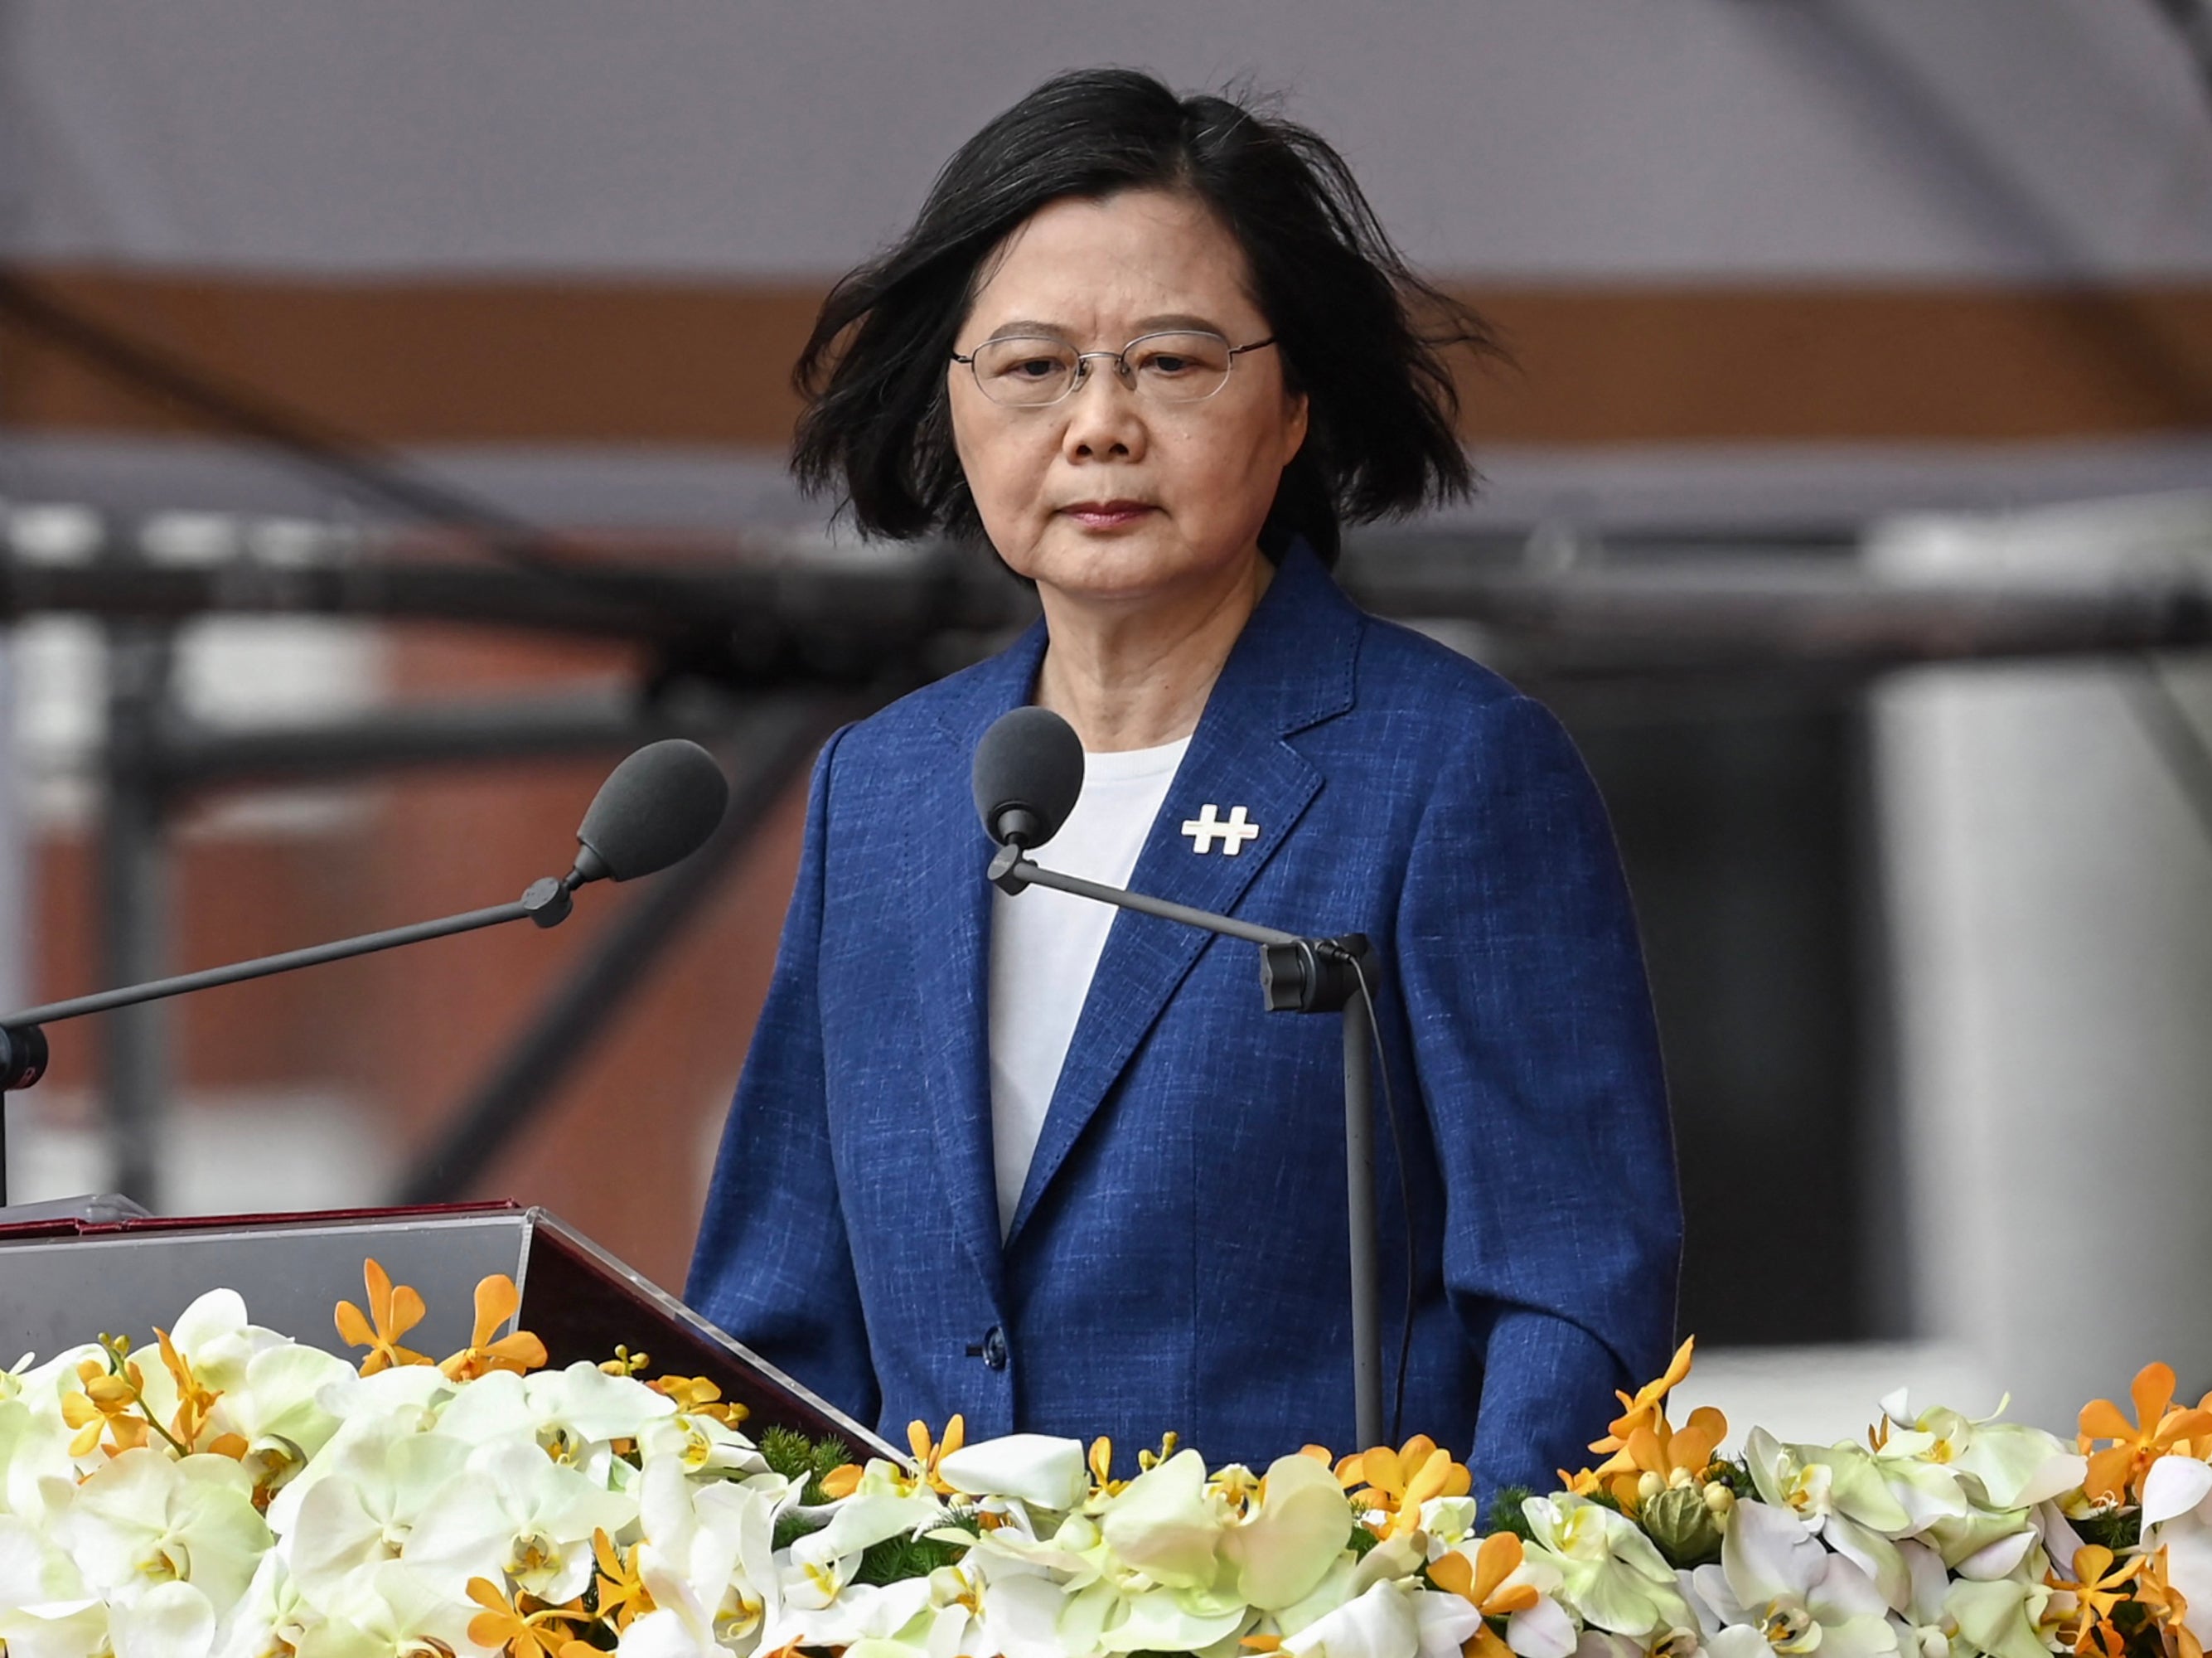 Taiwan’s President Tsai Ing-wen speaks during National Day celebrations in front of the presidential palace in Taipei